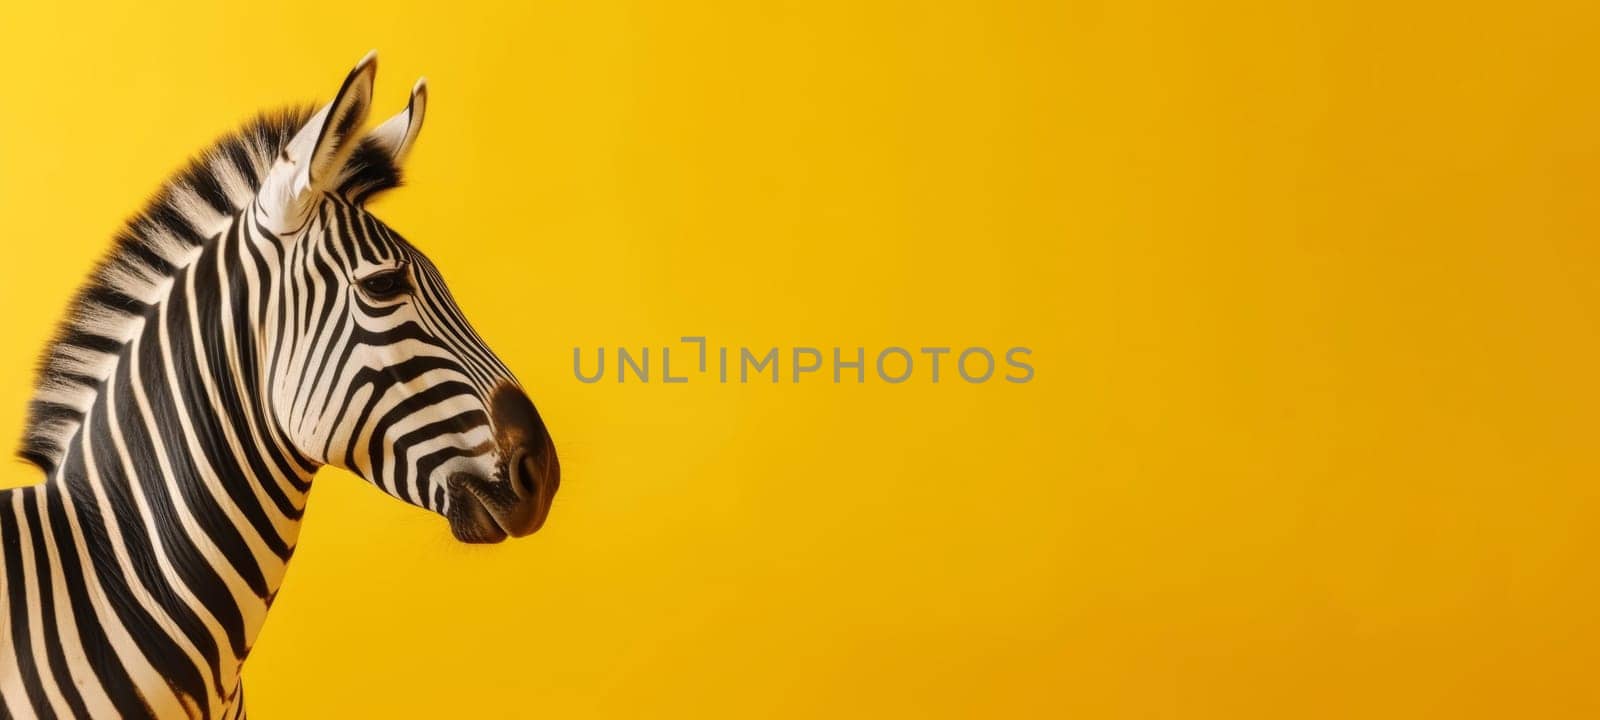 Zebra head profile on yellow background. Wildlife and nature concept. Design for print, banner, poster